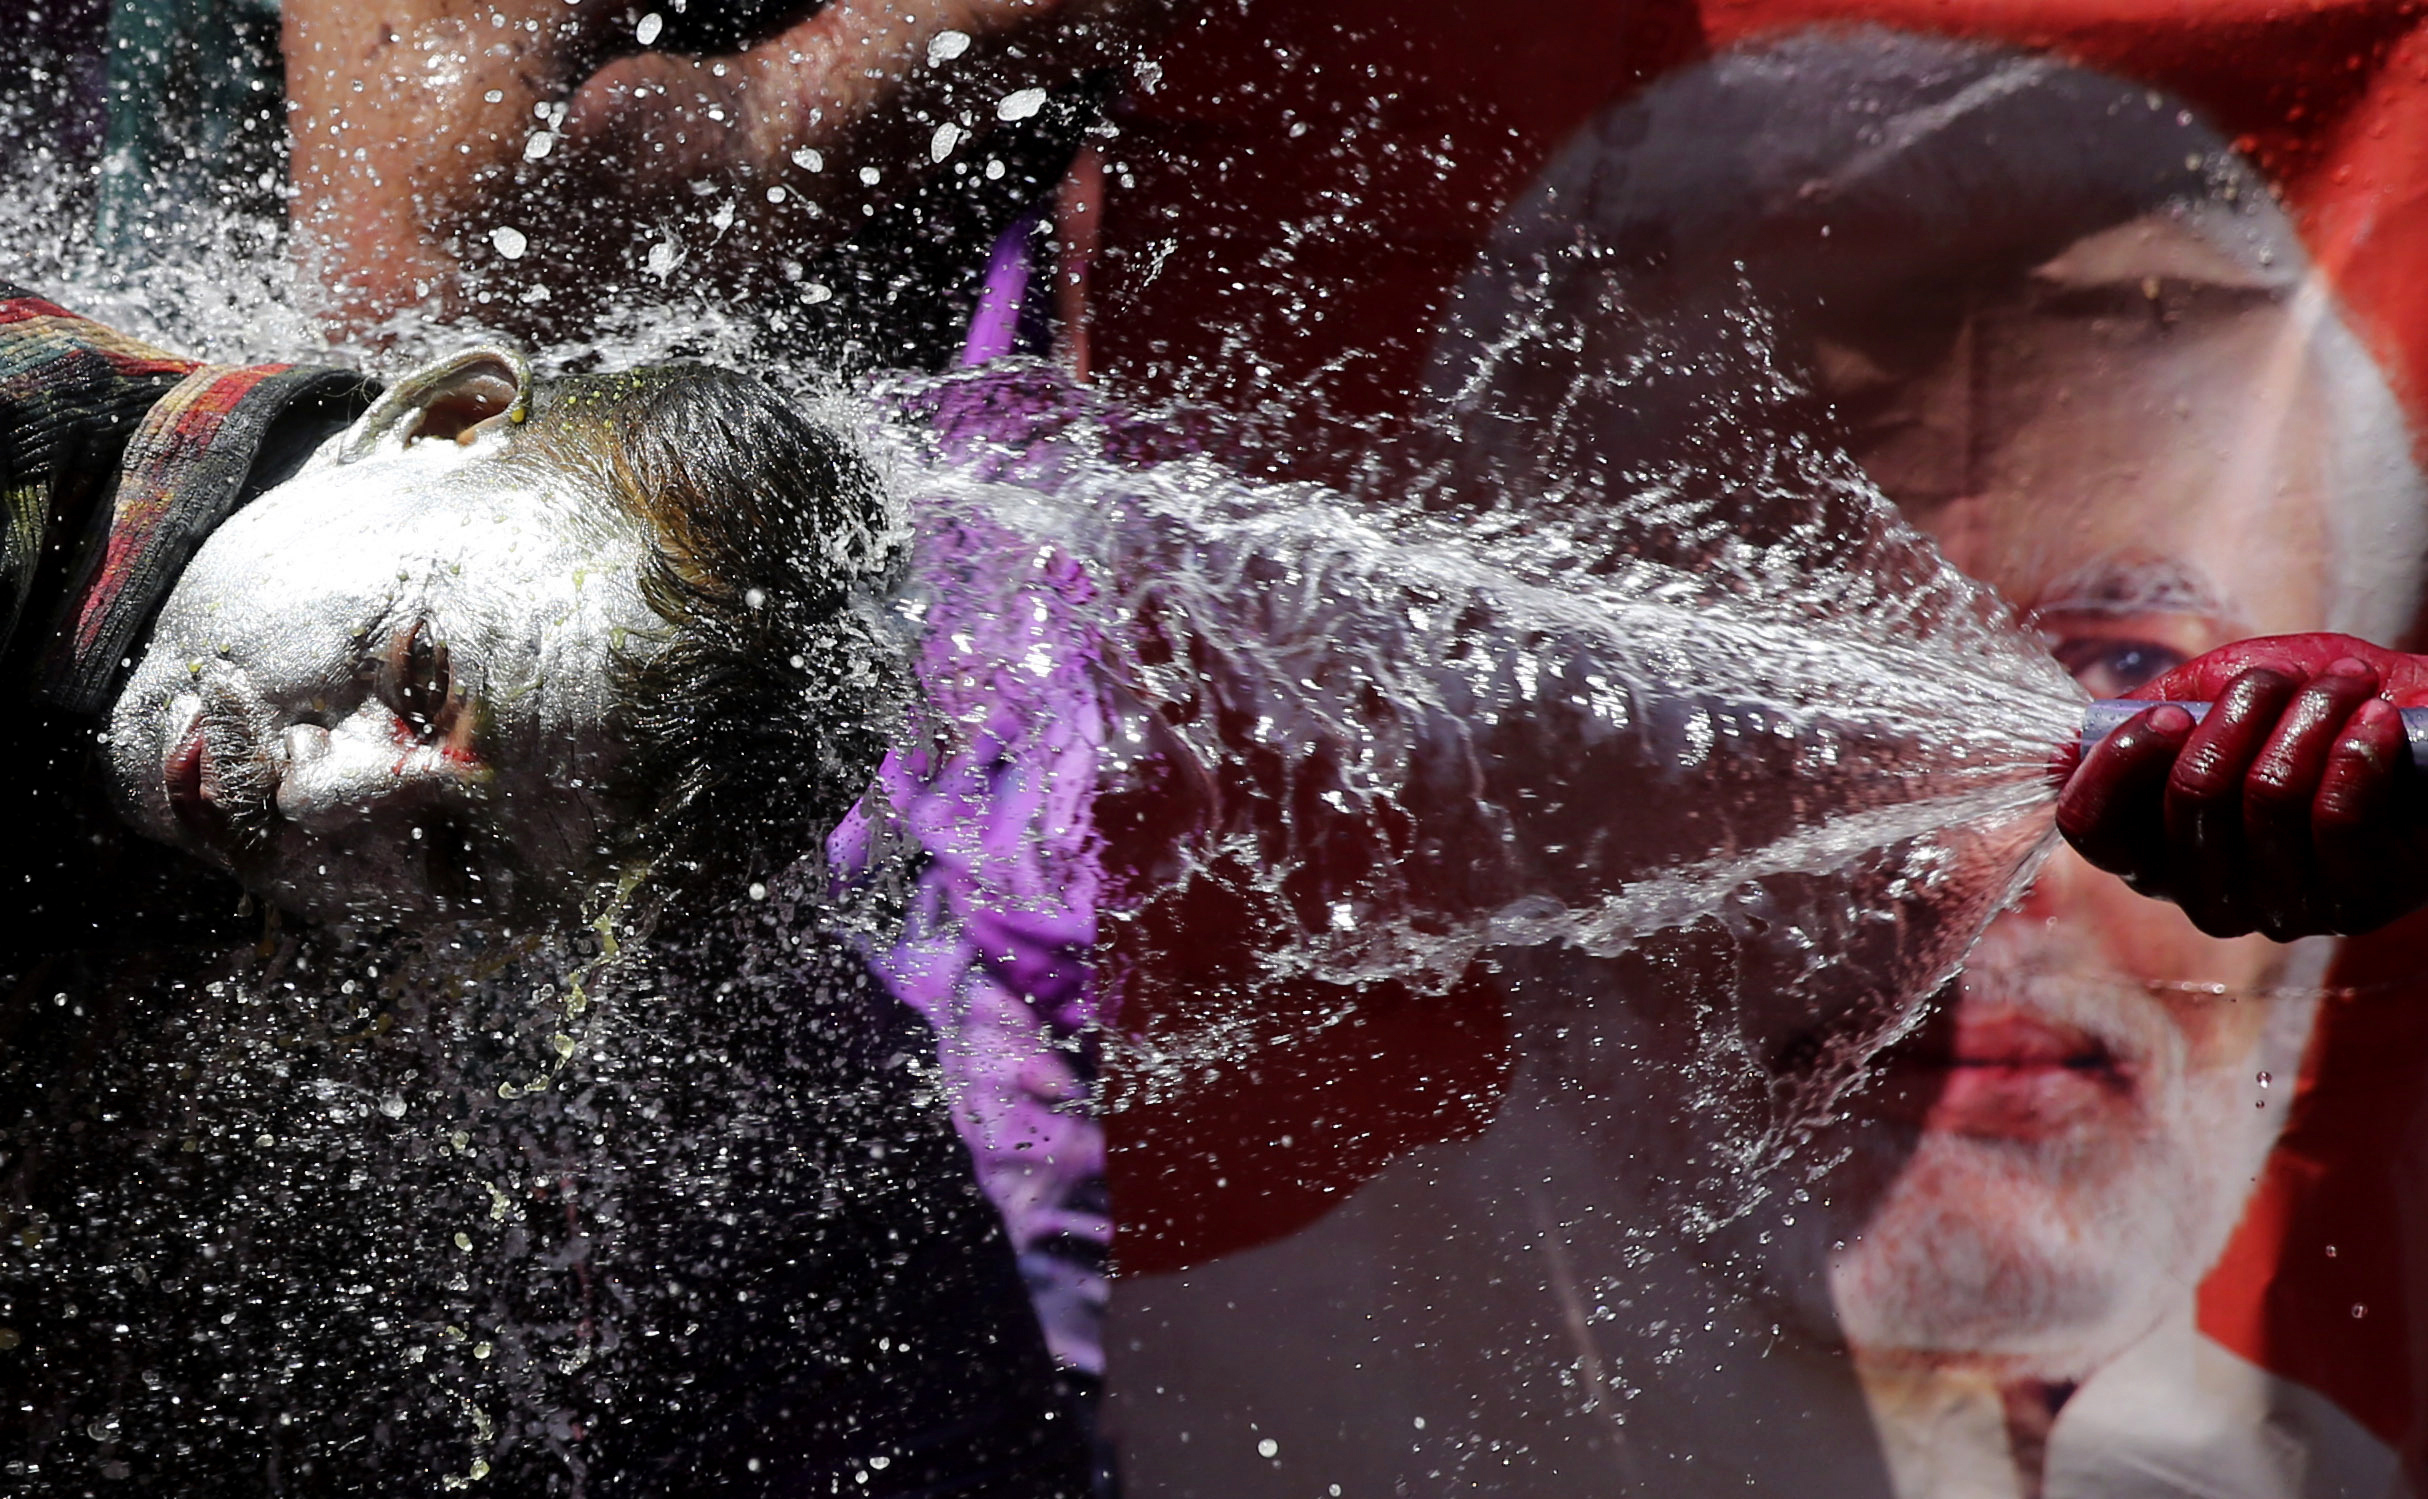 An Indian reveler has water sprayed on his head during celebrations to mark Holi, the Hindu festival of colors, in Prayagraj, India, Friday, March 22, 2019. Indians on Thursday celebrated Holi, the riotous annual celebration of color, that marks the end of winter and the arrival of spring. People armed with water balloons, colored water and powder in multiple hues played Holi by smearing each other's faces with color. (AP Photo/Rajesh Kumar Singh)